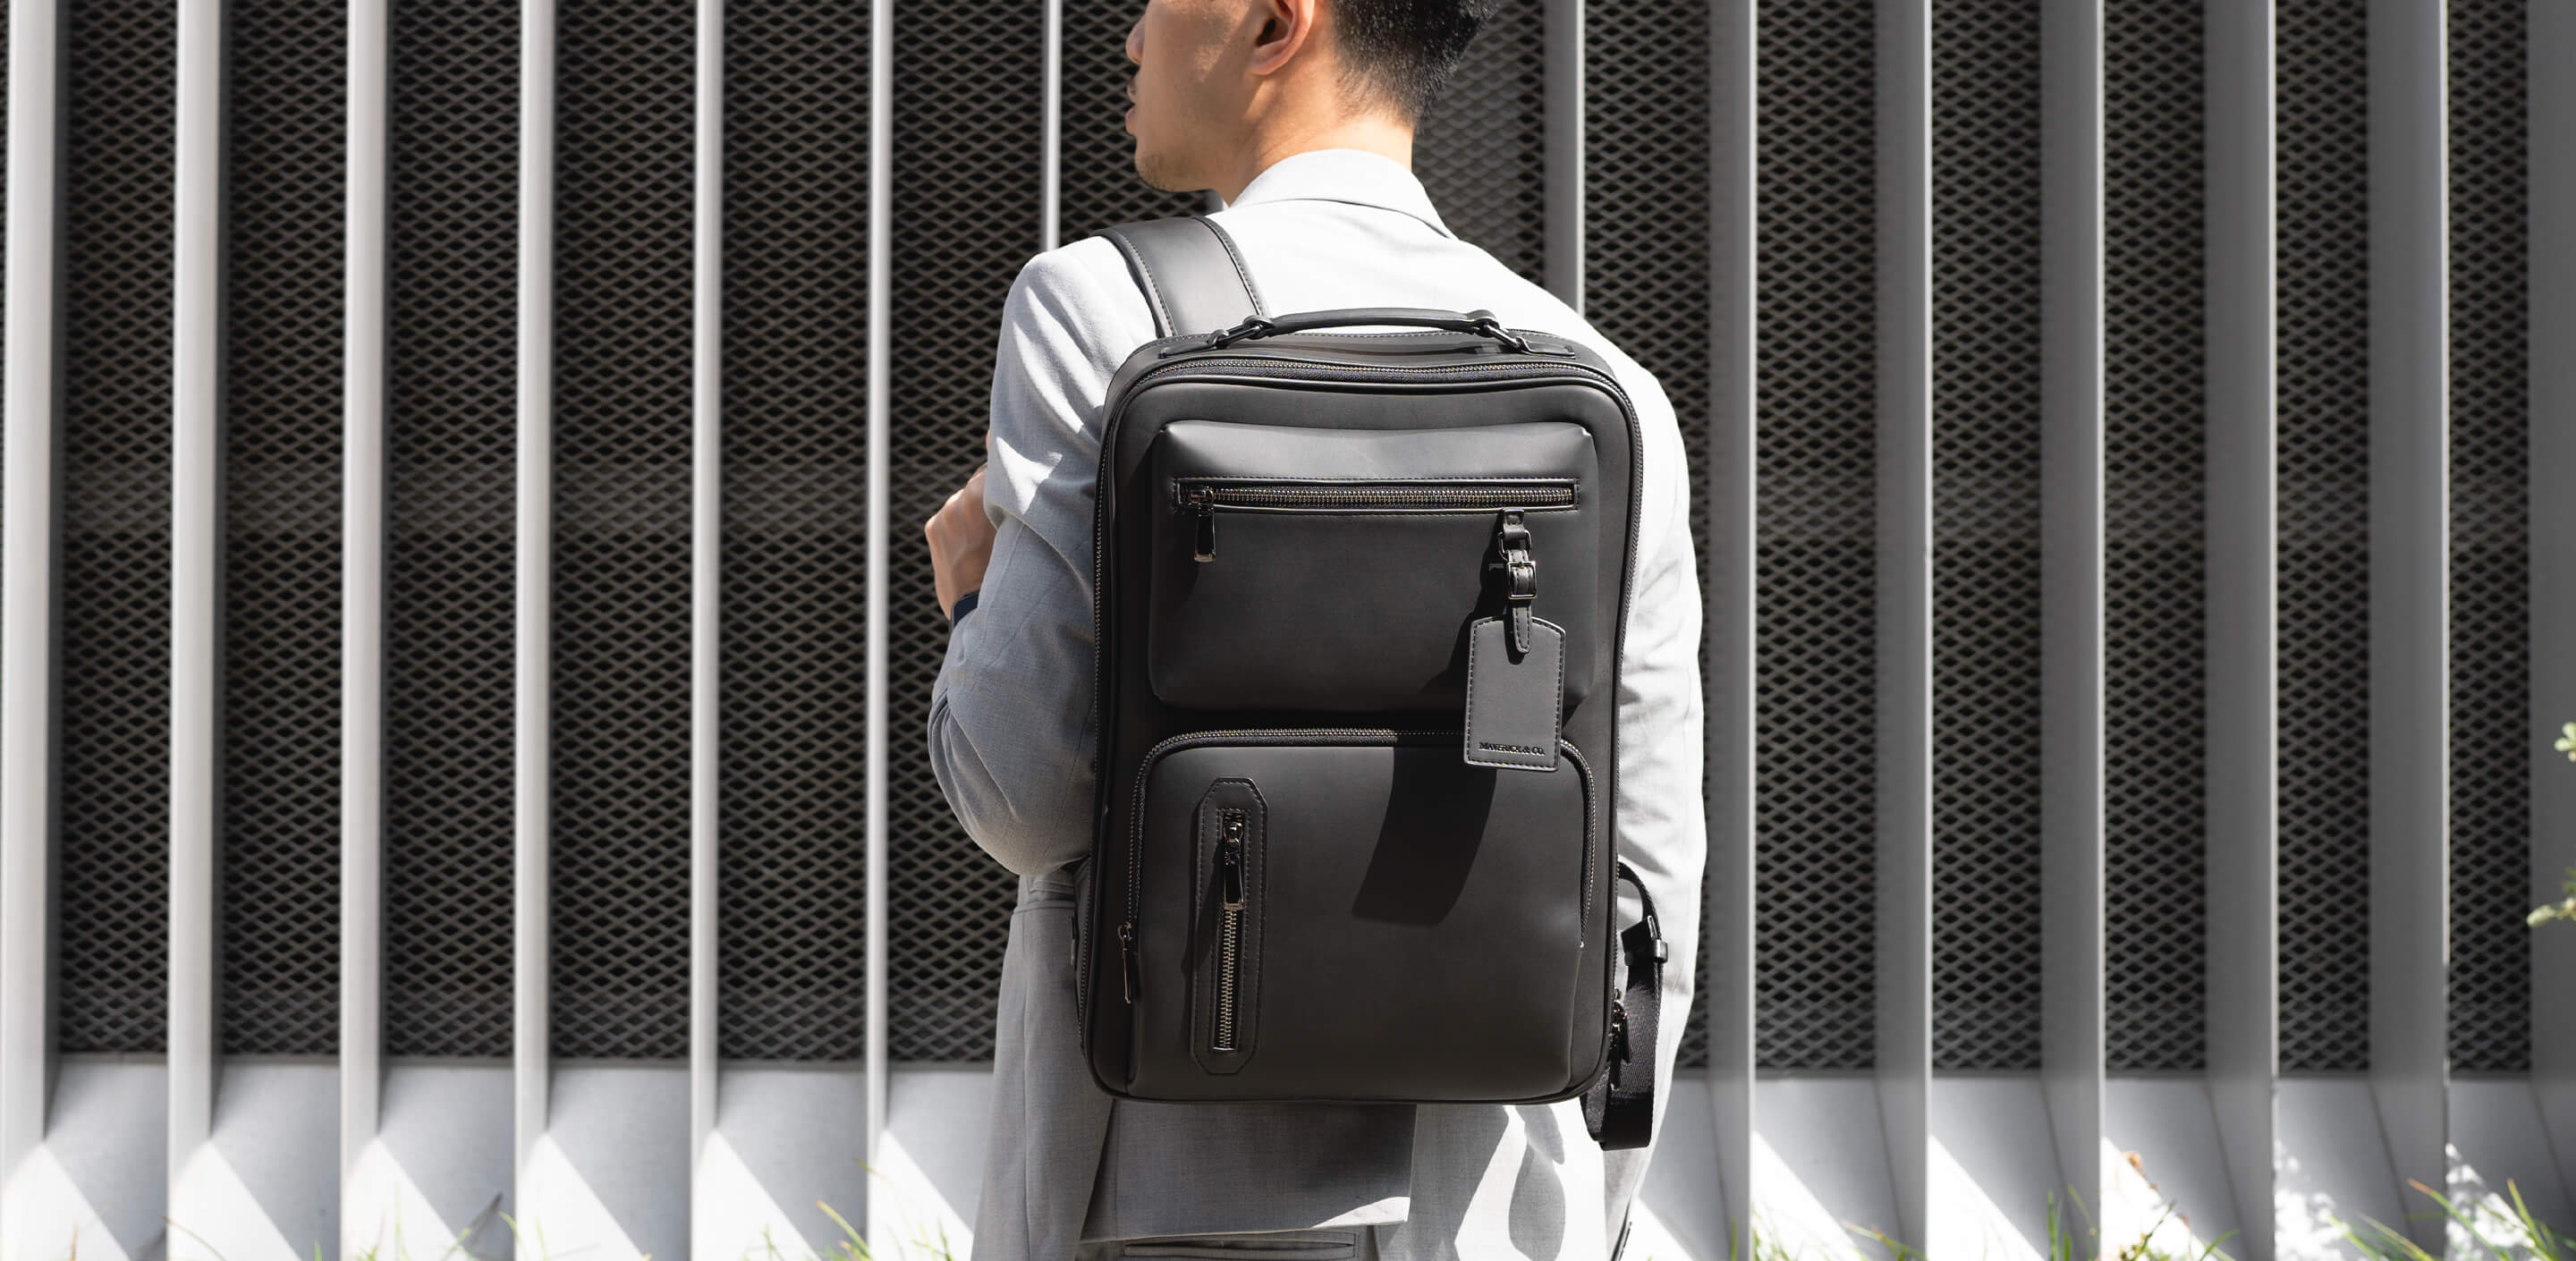 10 Best Men's Backpacks For Work that are Professional and Stylish, Backpackies